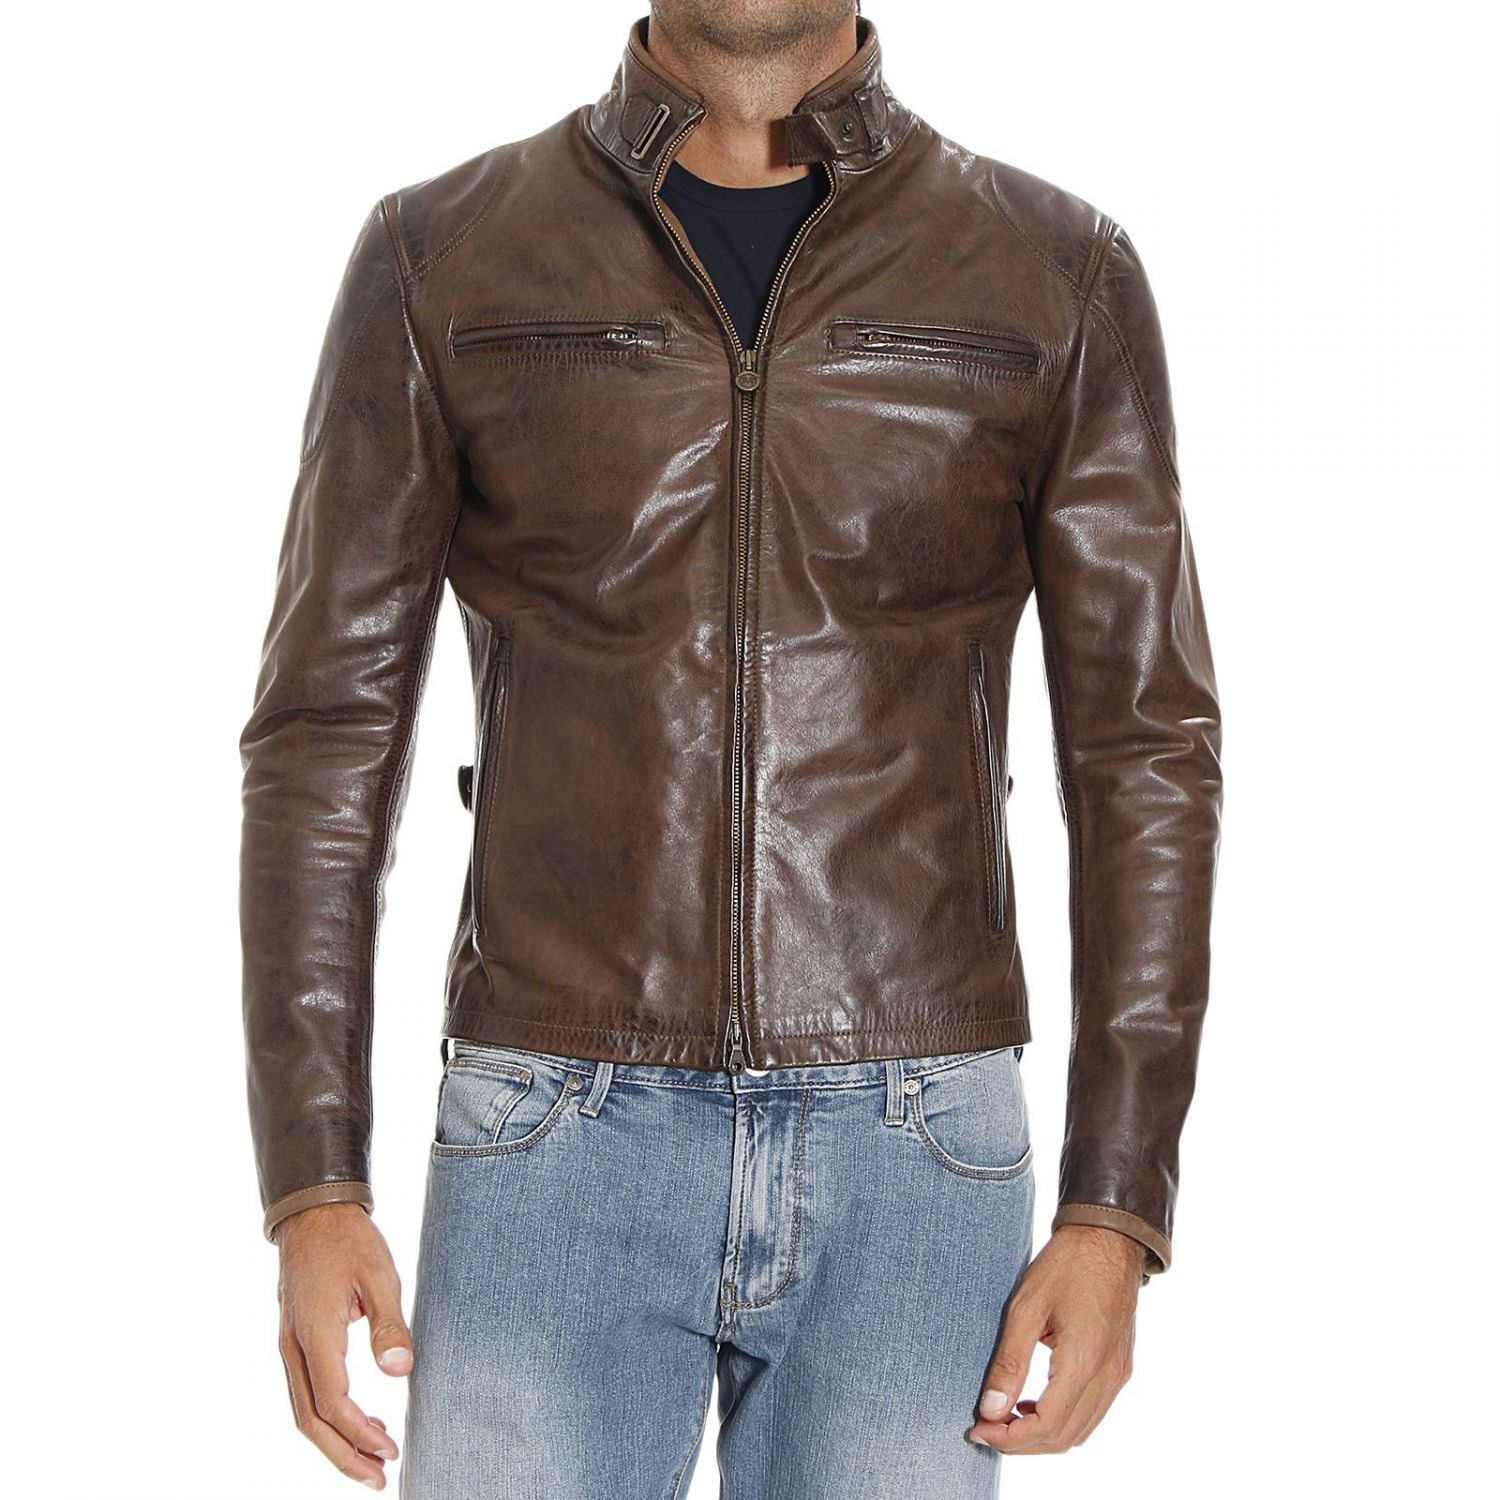 Lyst - Matchless Down Jacket in Brown for Men